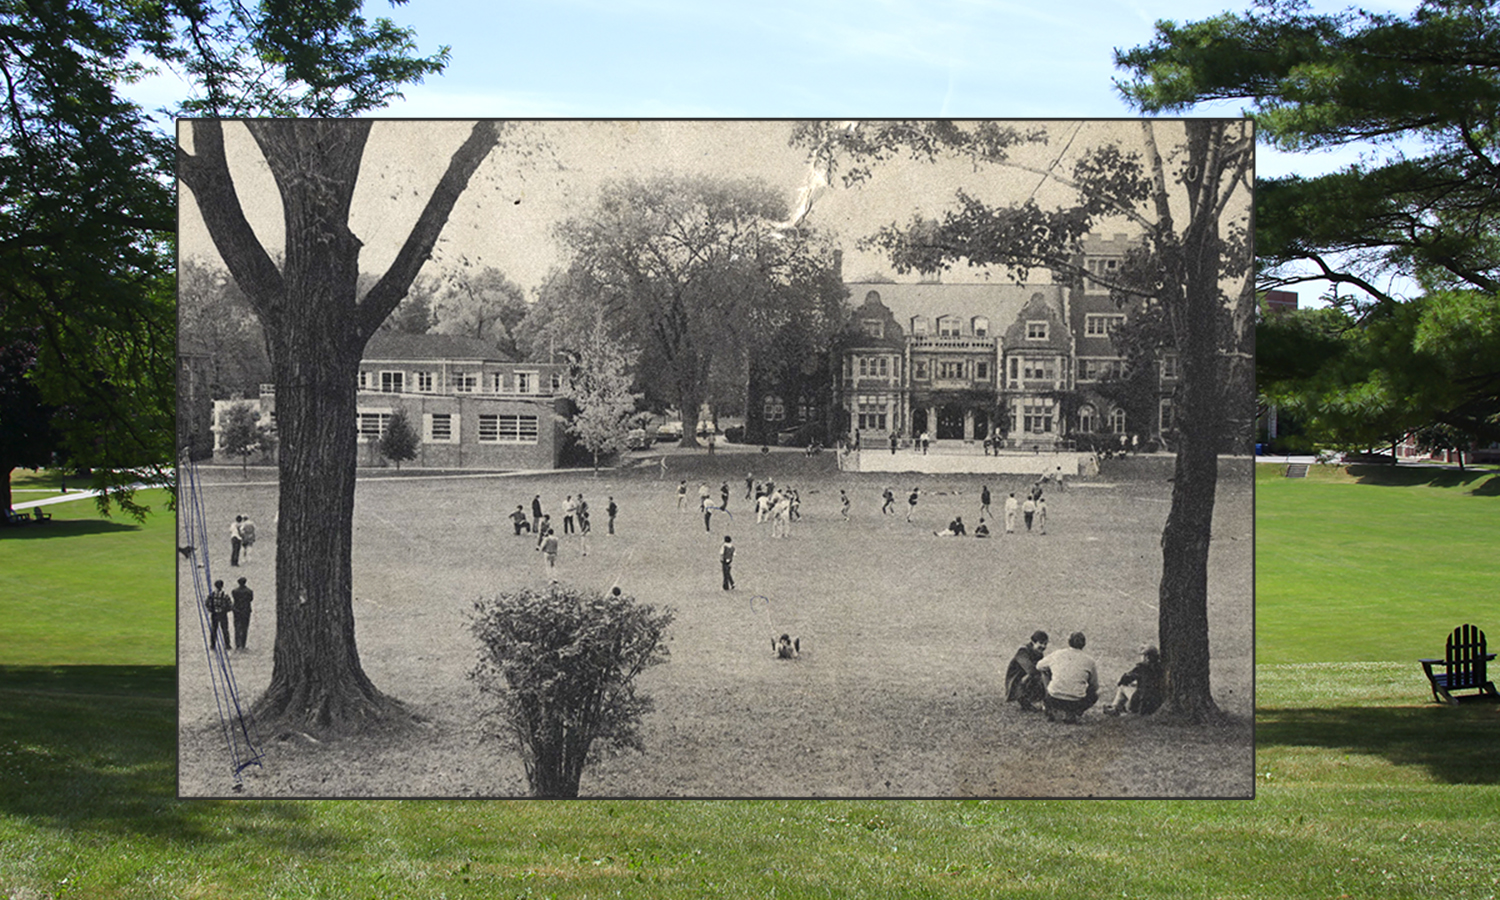 In This Week in Photos, we look at the HWS campus of today and yesterday. Whether the 1960s or the 2020s, the Quad is always a popular place to relax on a sunny day.